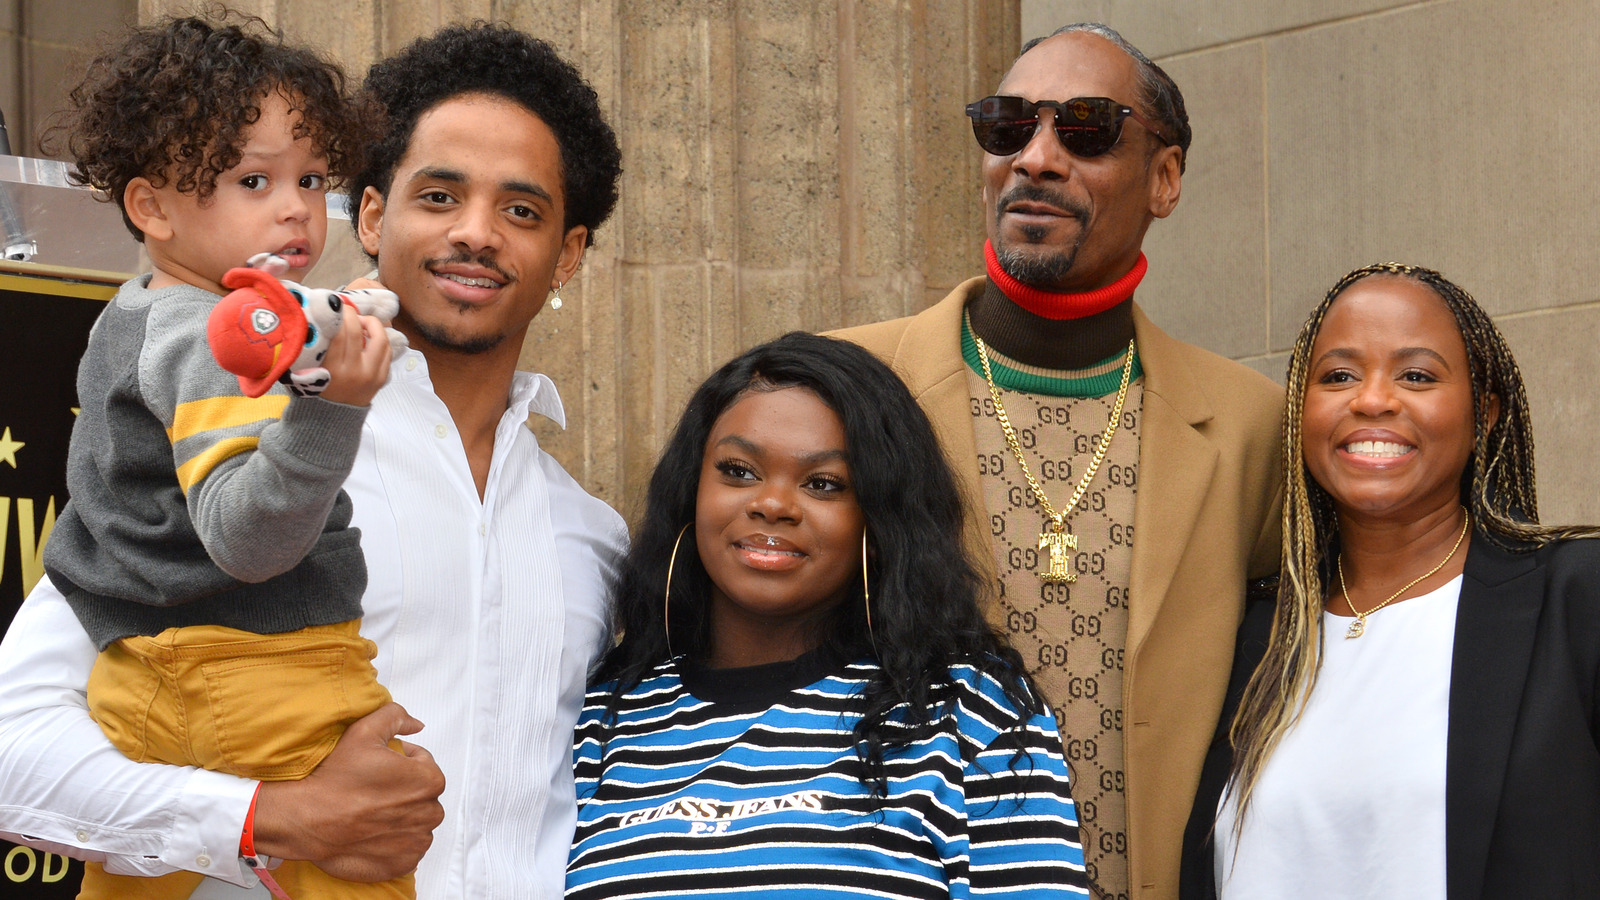 Everything We Know About Snoop Dogg's Children